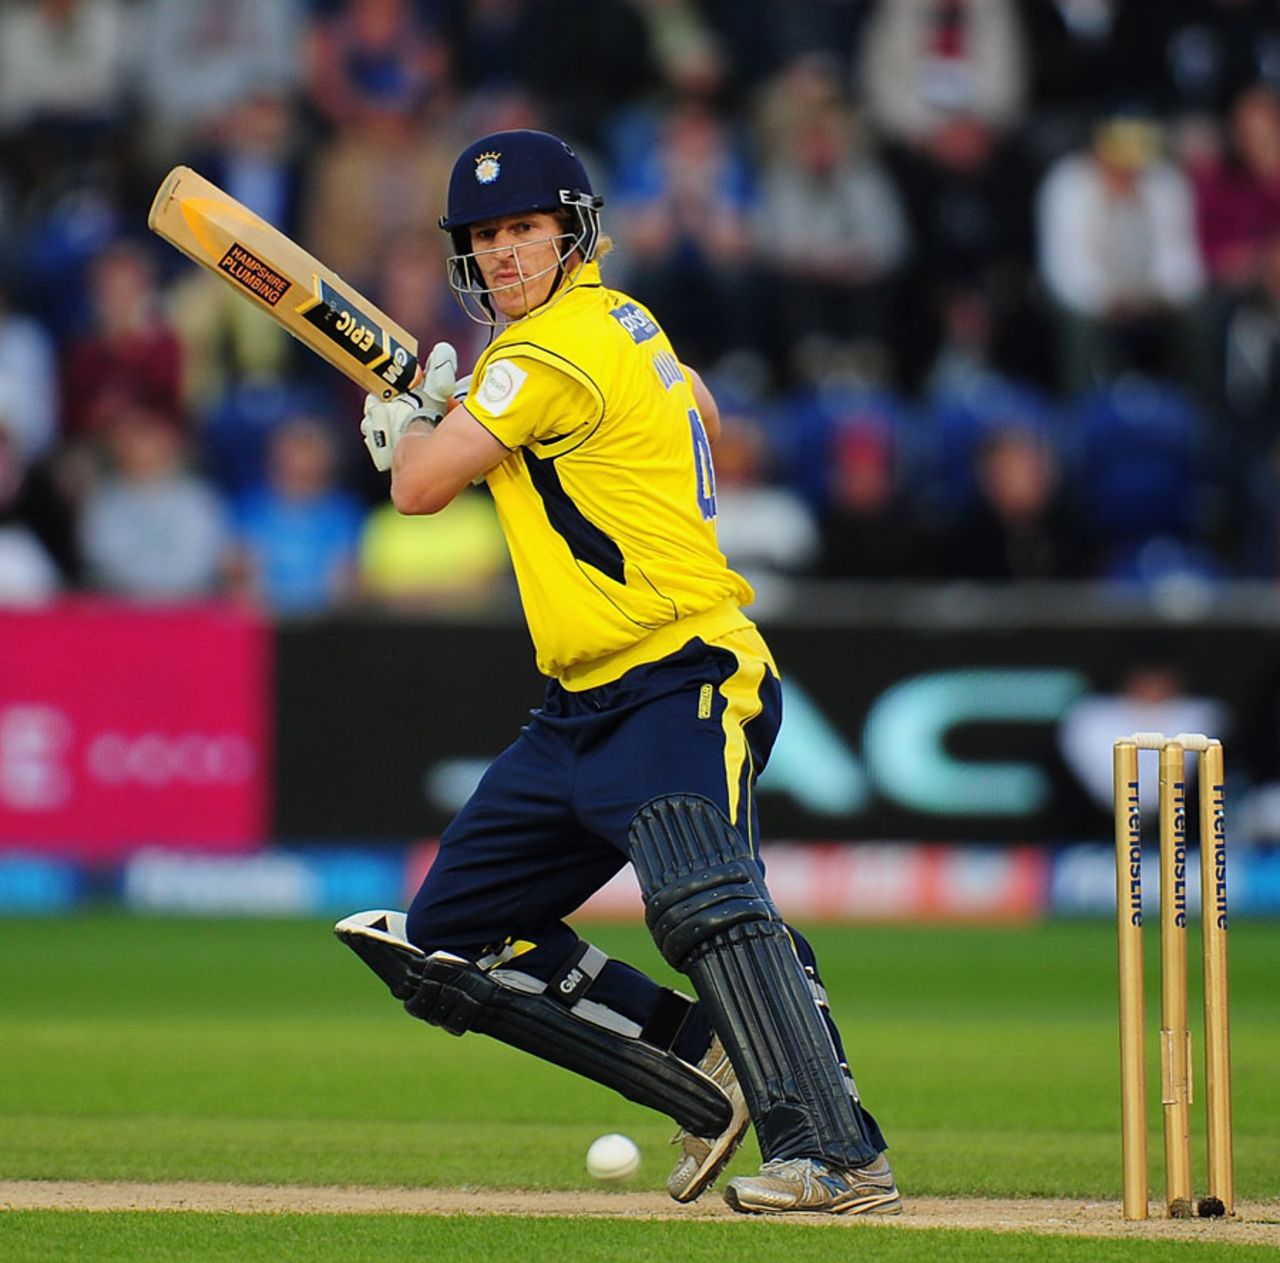 Jimmy Adams gave the Hampshire innings a solid base, Yorkshire v Hampshire, Friends Life t20 final, August 25, 2012